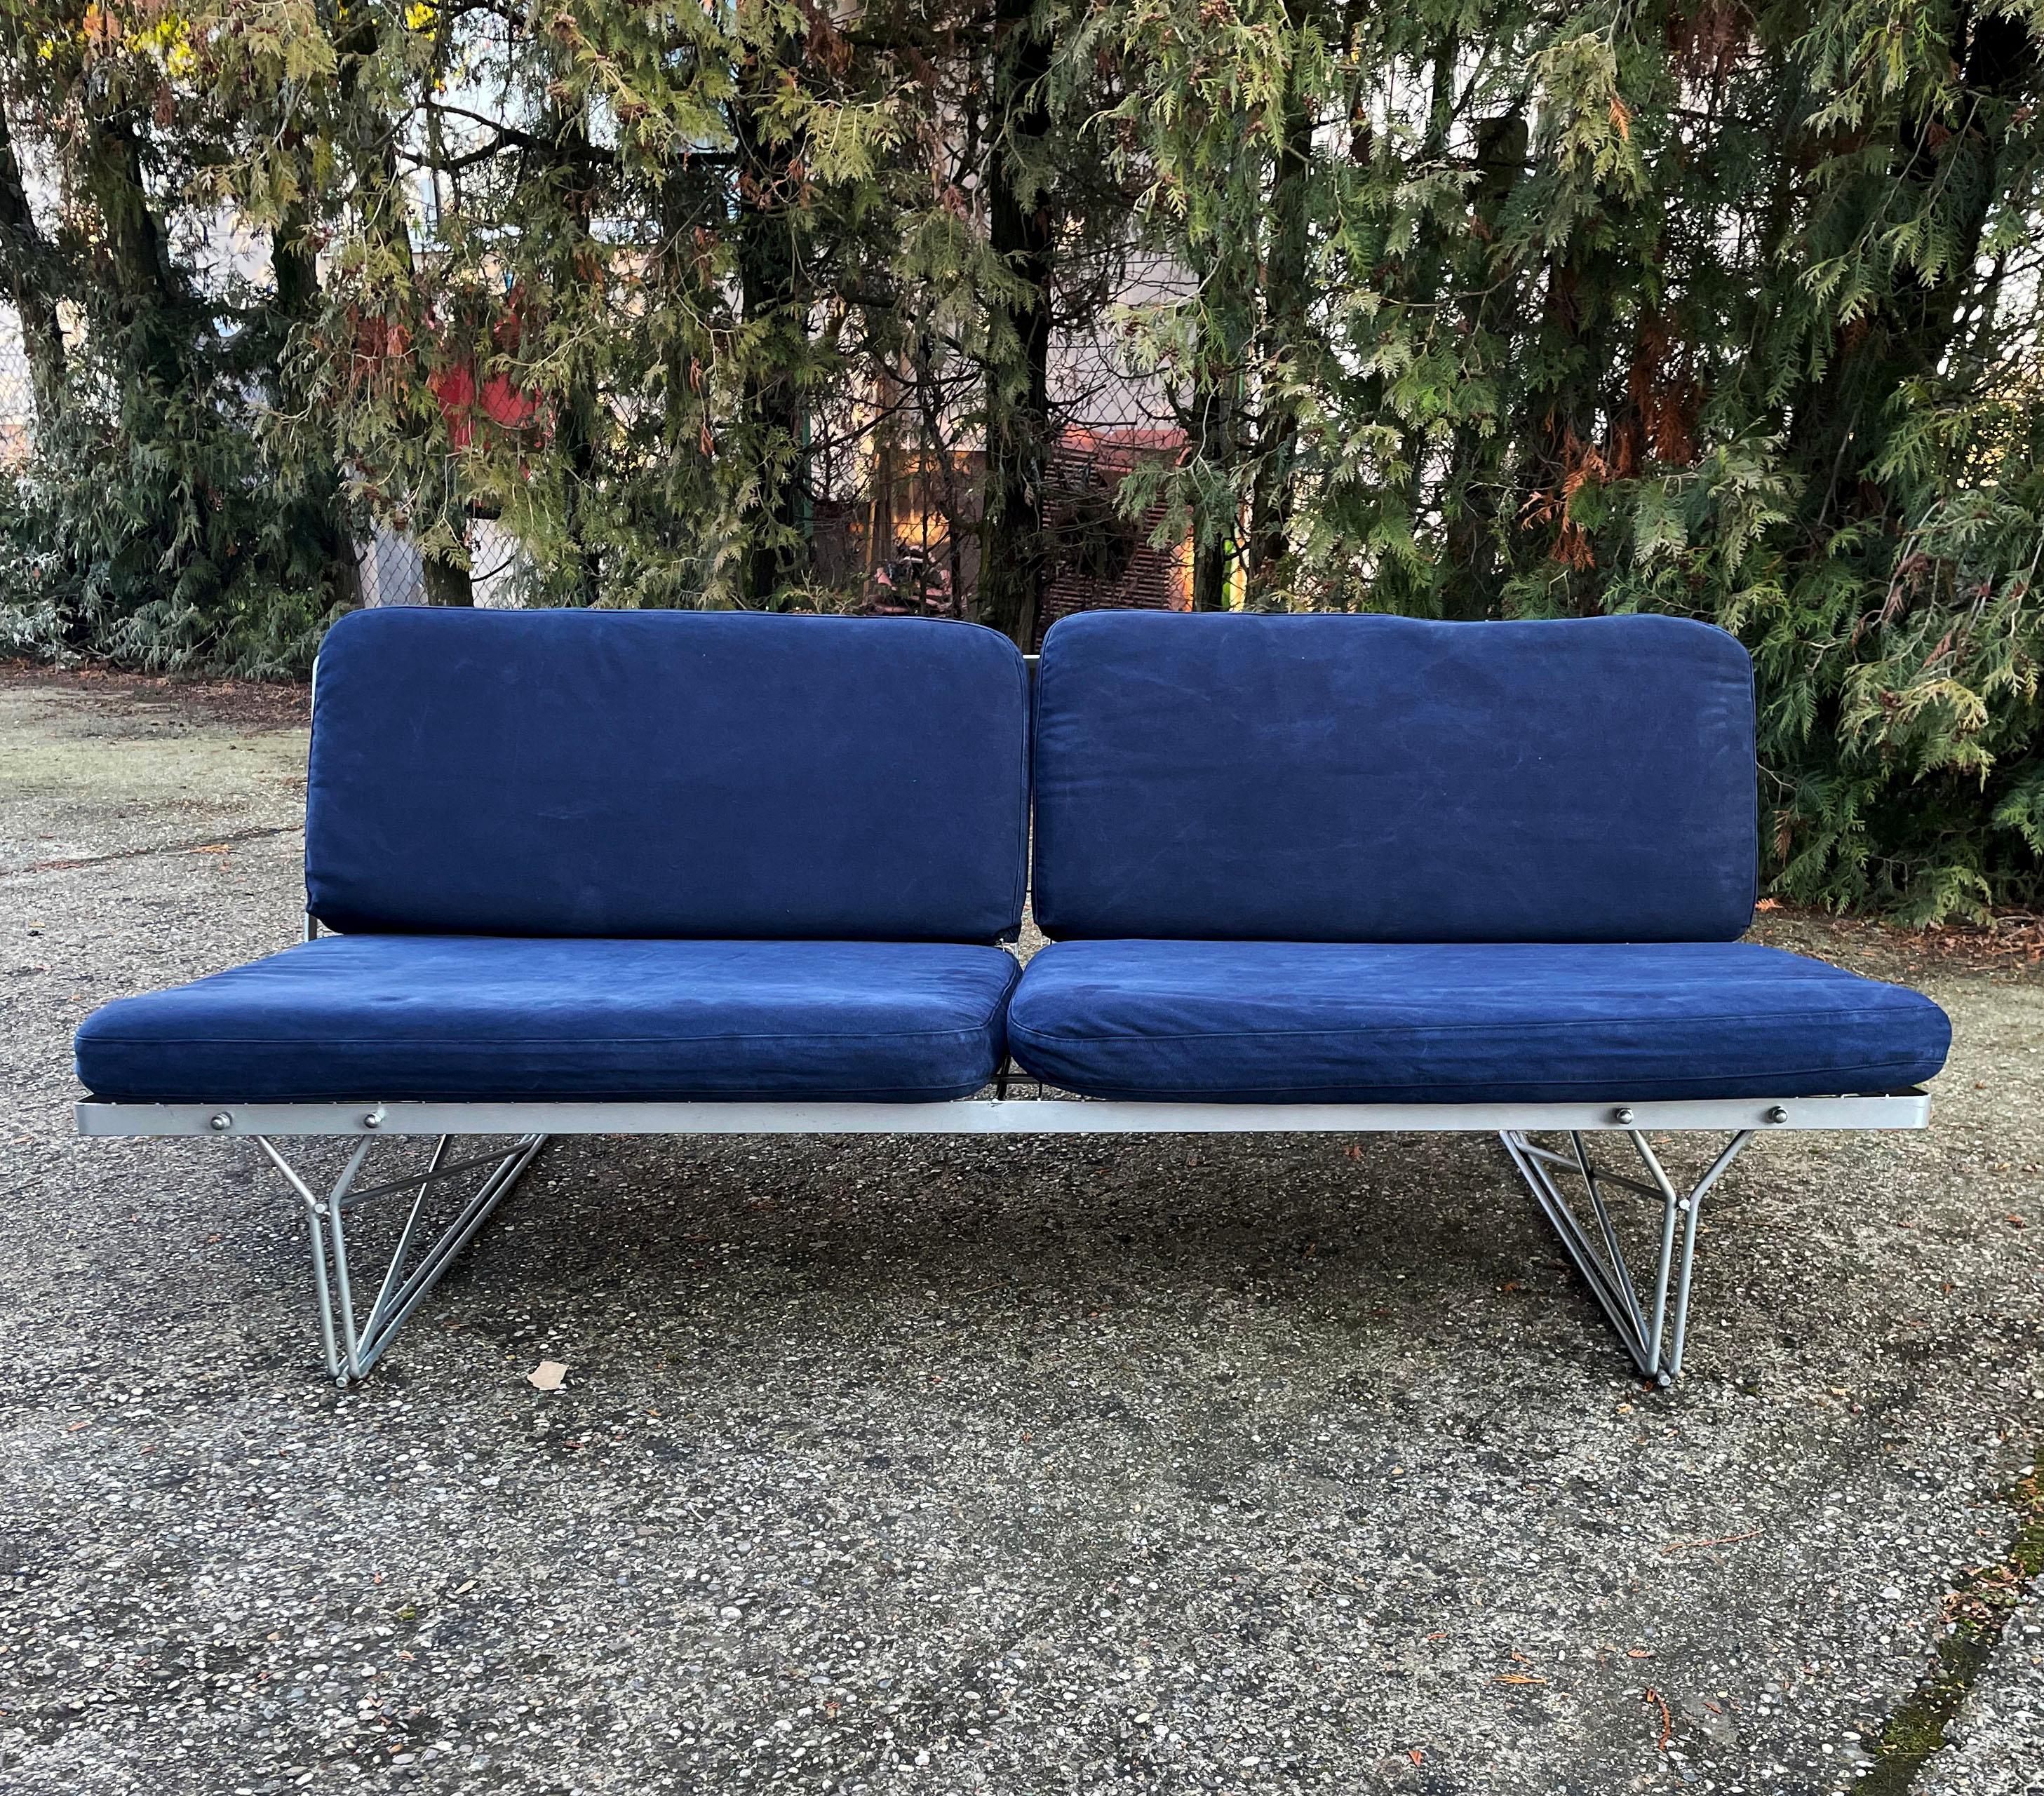 Niels Gammelgaard for Ikea 'Moment' sofa, designed 1986.

The moment sofa was designed by Niels Gammelgaard for Ikea in the 1980s and is one of the most in-demand vintage Ikea designs. The steel frame was inspired by a visit to a factory that